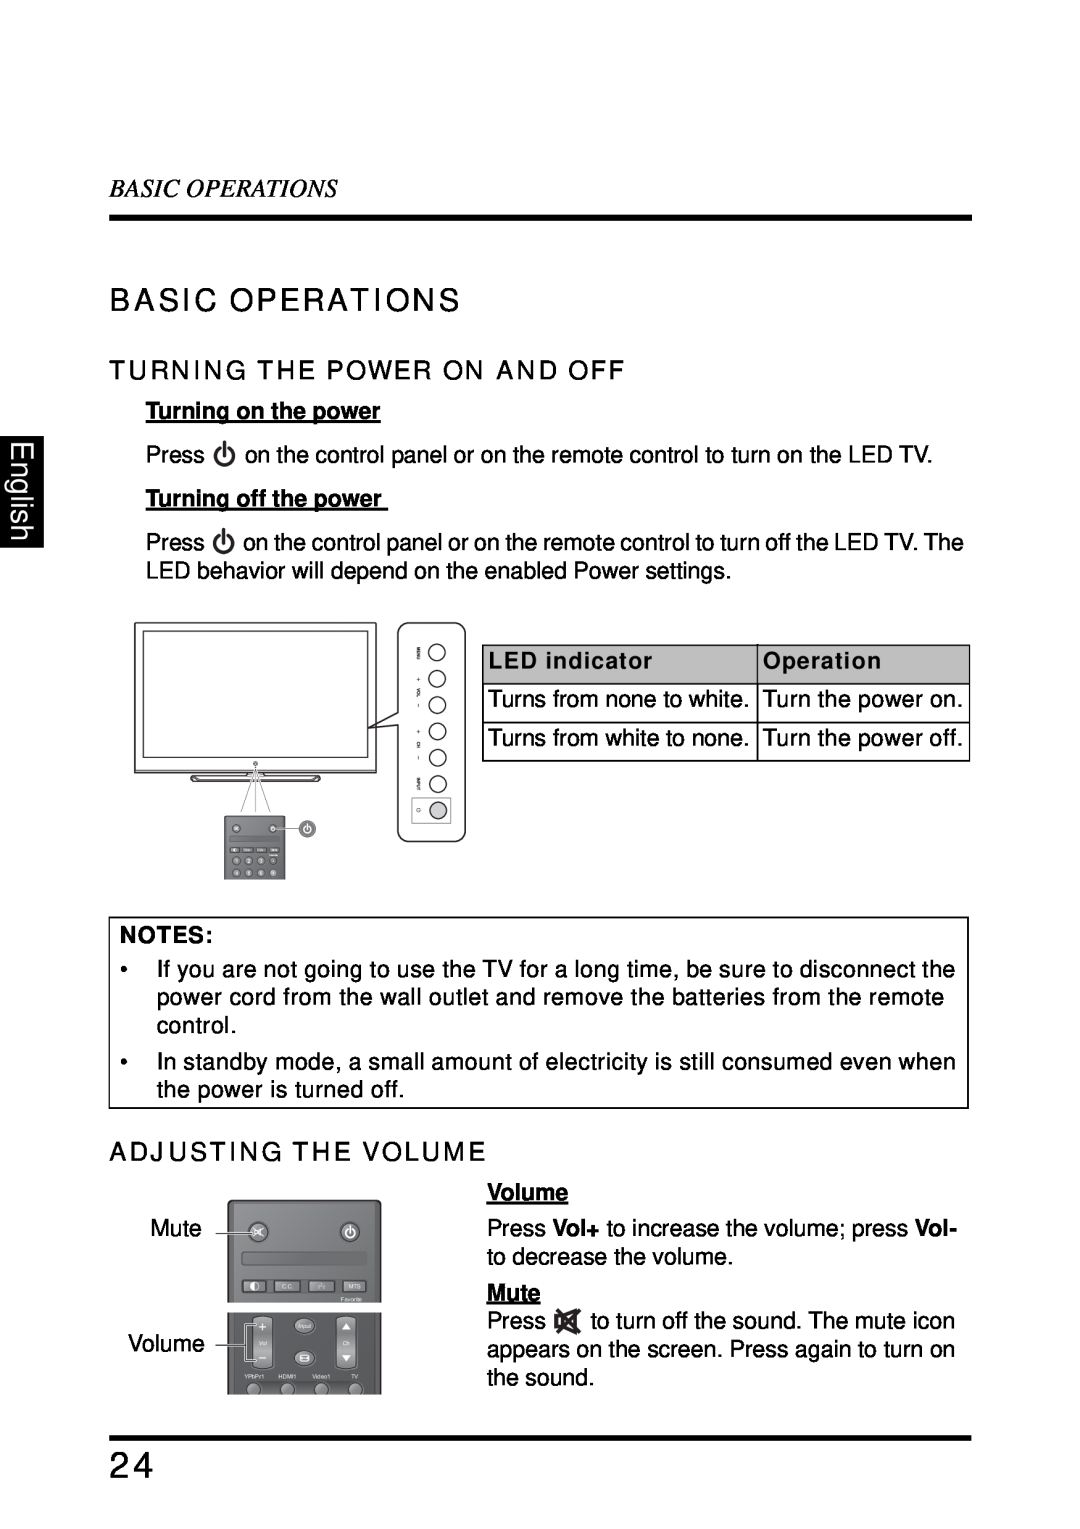 Westinghouse LD-4680 user manual Basic Operations, English, Turning The Power On And Off, Adjusting The Volume 